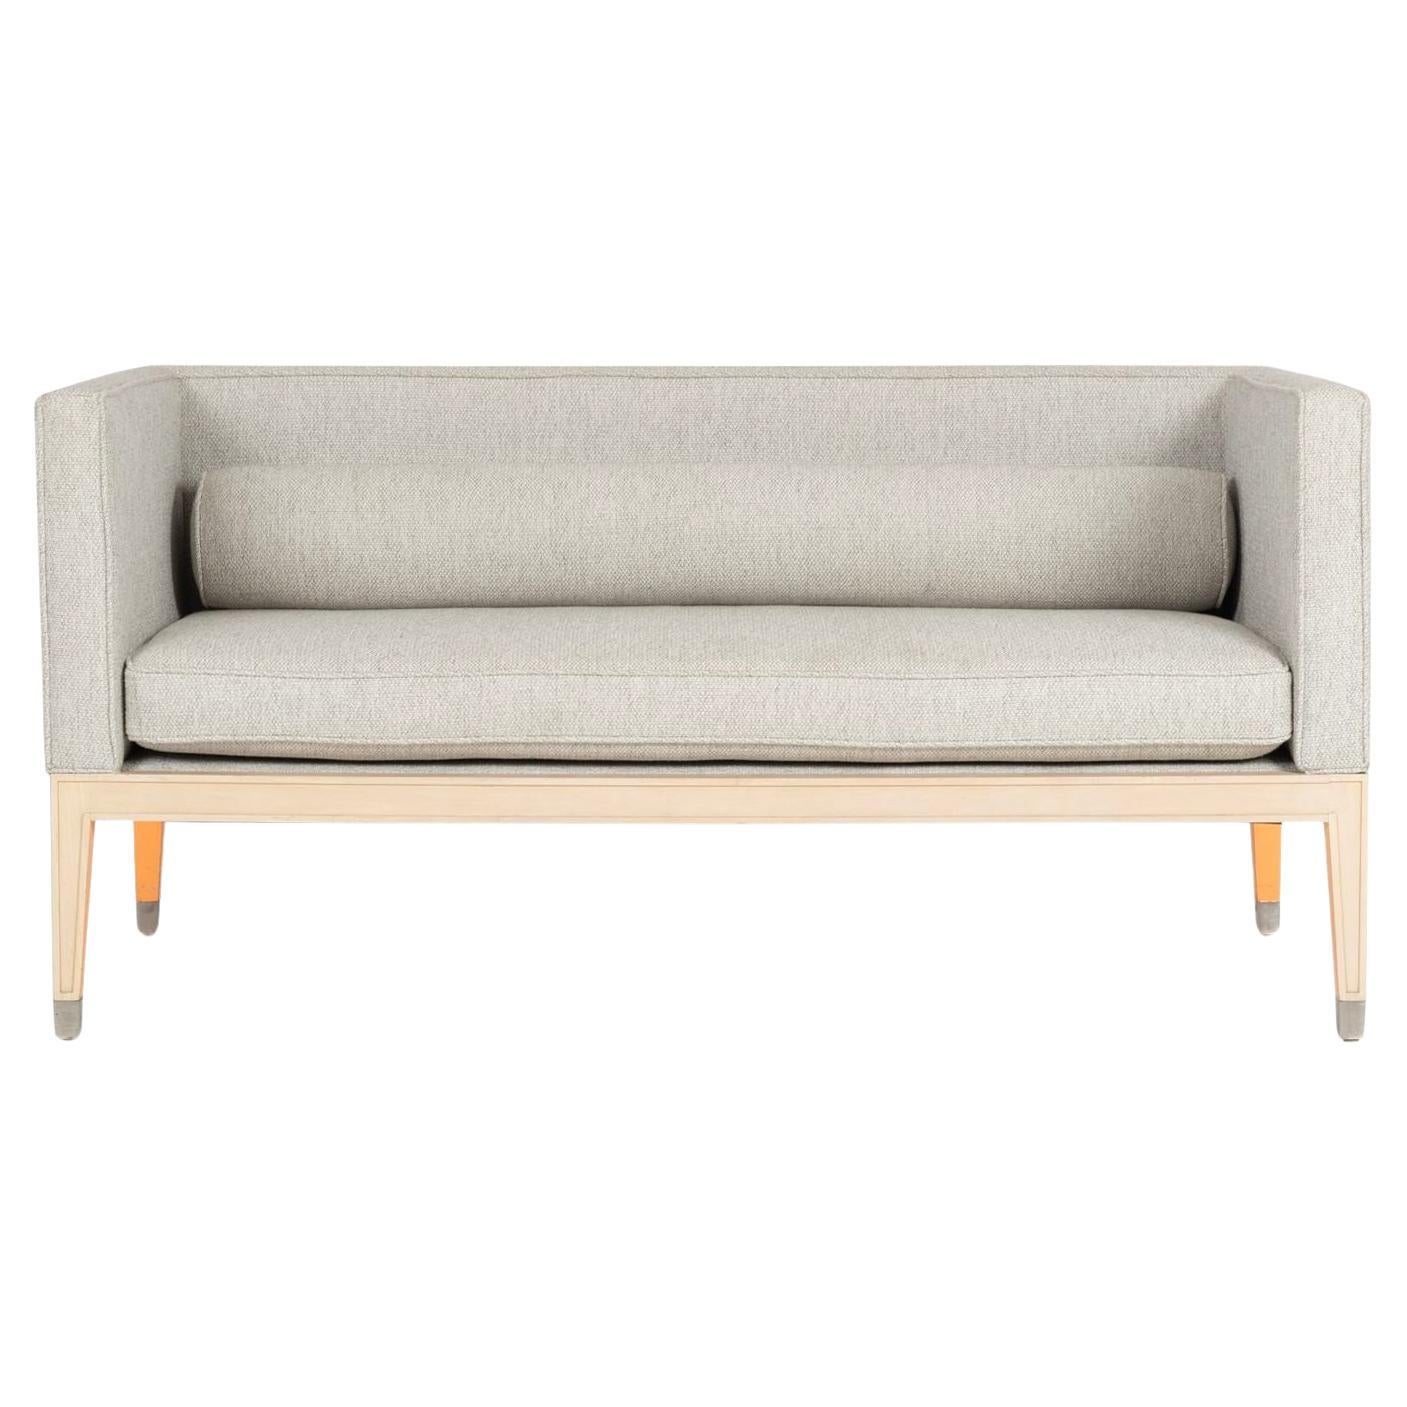 Phillipe Starck Sofa from the Clift Hotel San Fransisco For Sale